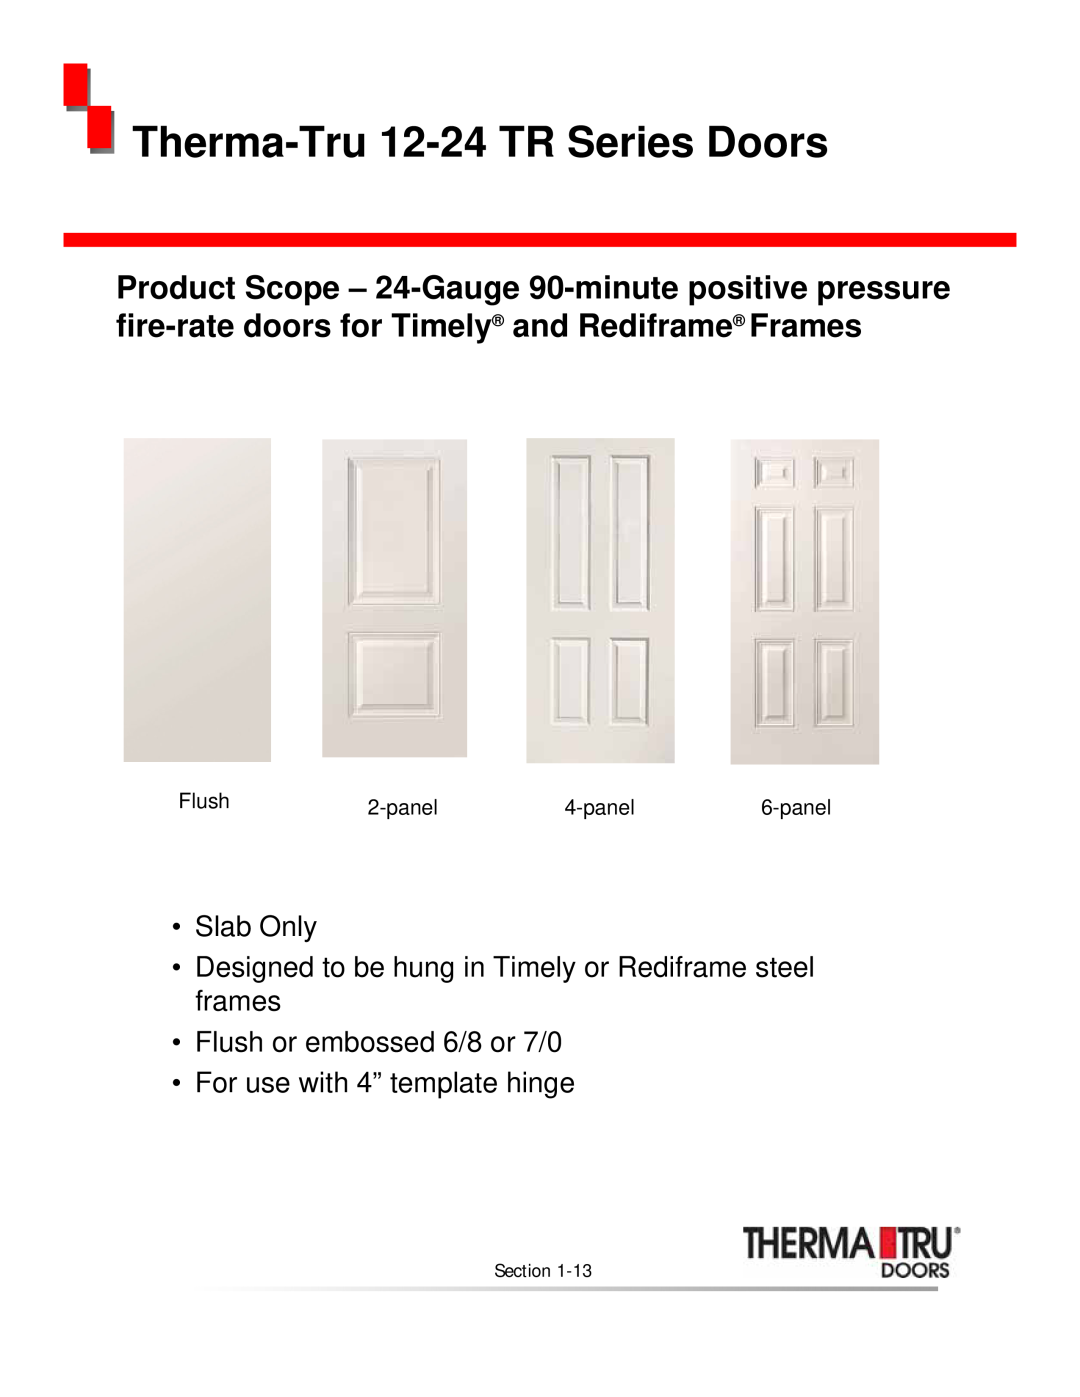 Therma-Tru none Therma-Tru 12-24TR Series Doors, Slab Only, Flush or embossed 6/8 or 7/0, For use with 4” template hinge 